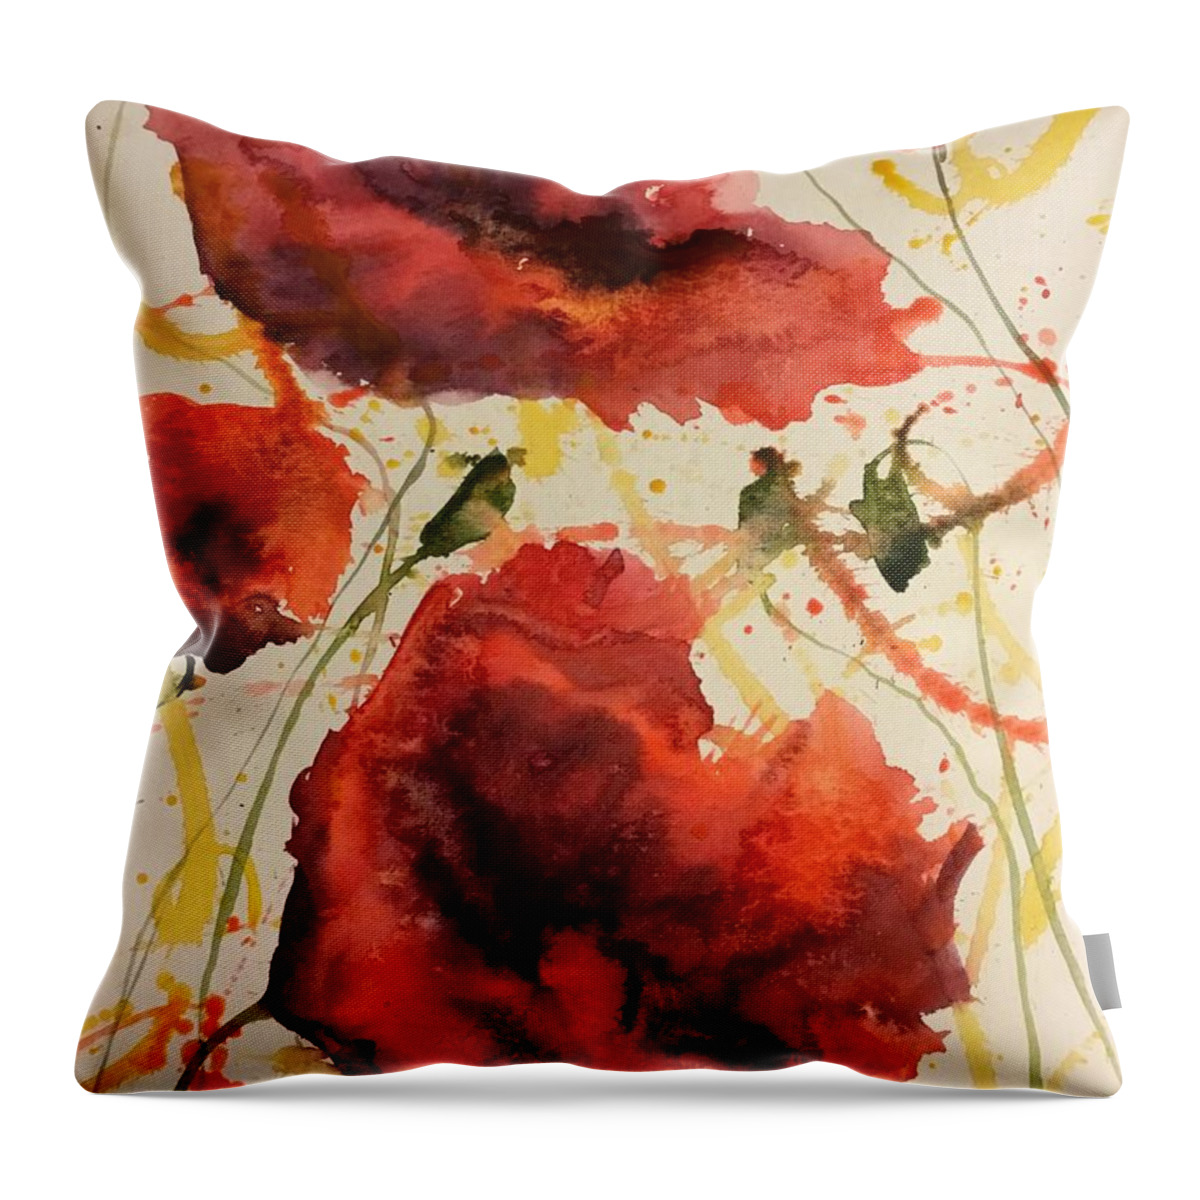 1502019 Throw Pillow featuring the painting 1502019 by Han in Huang wong